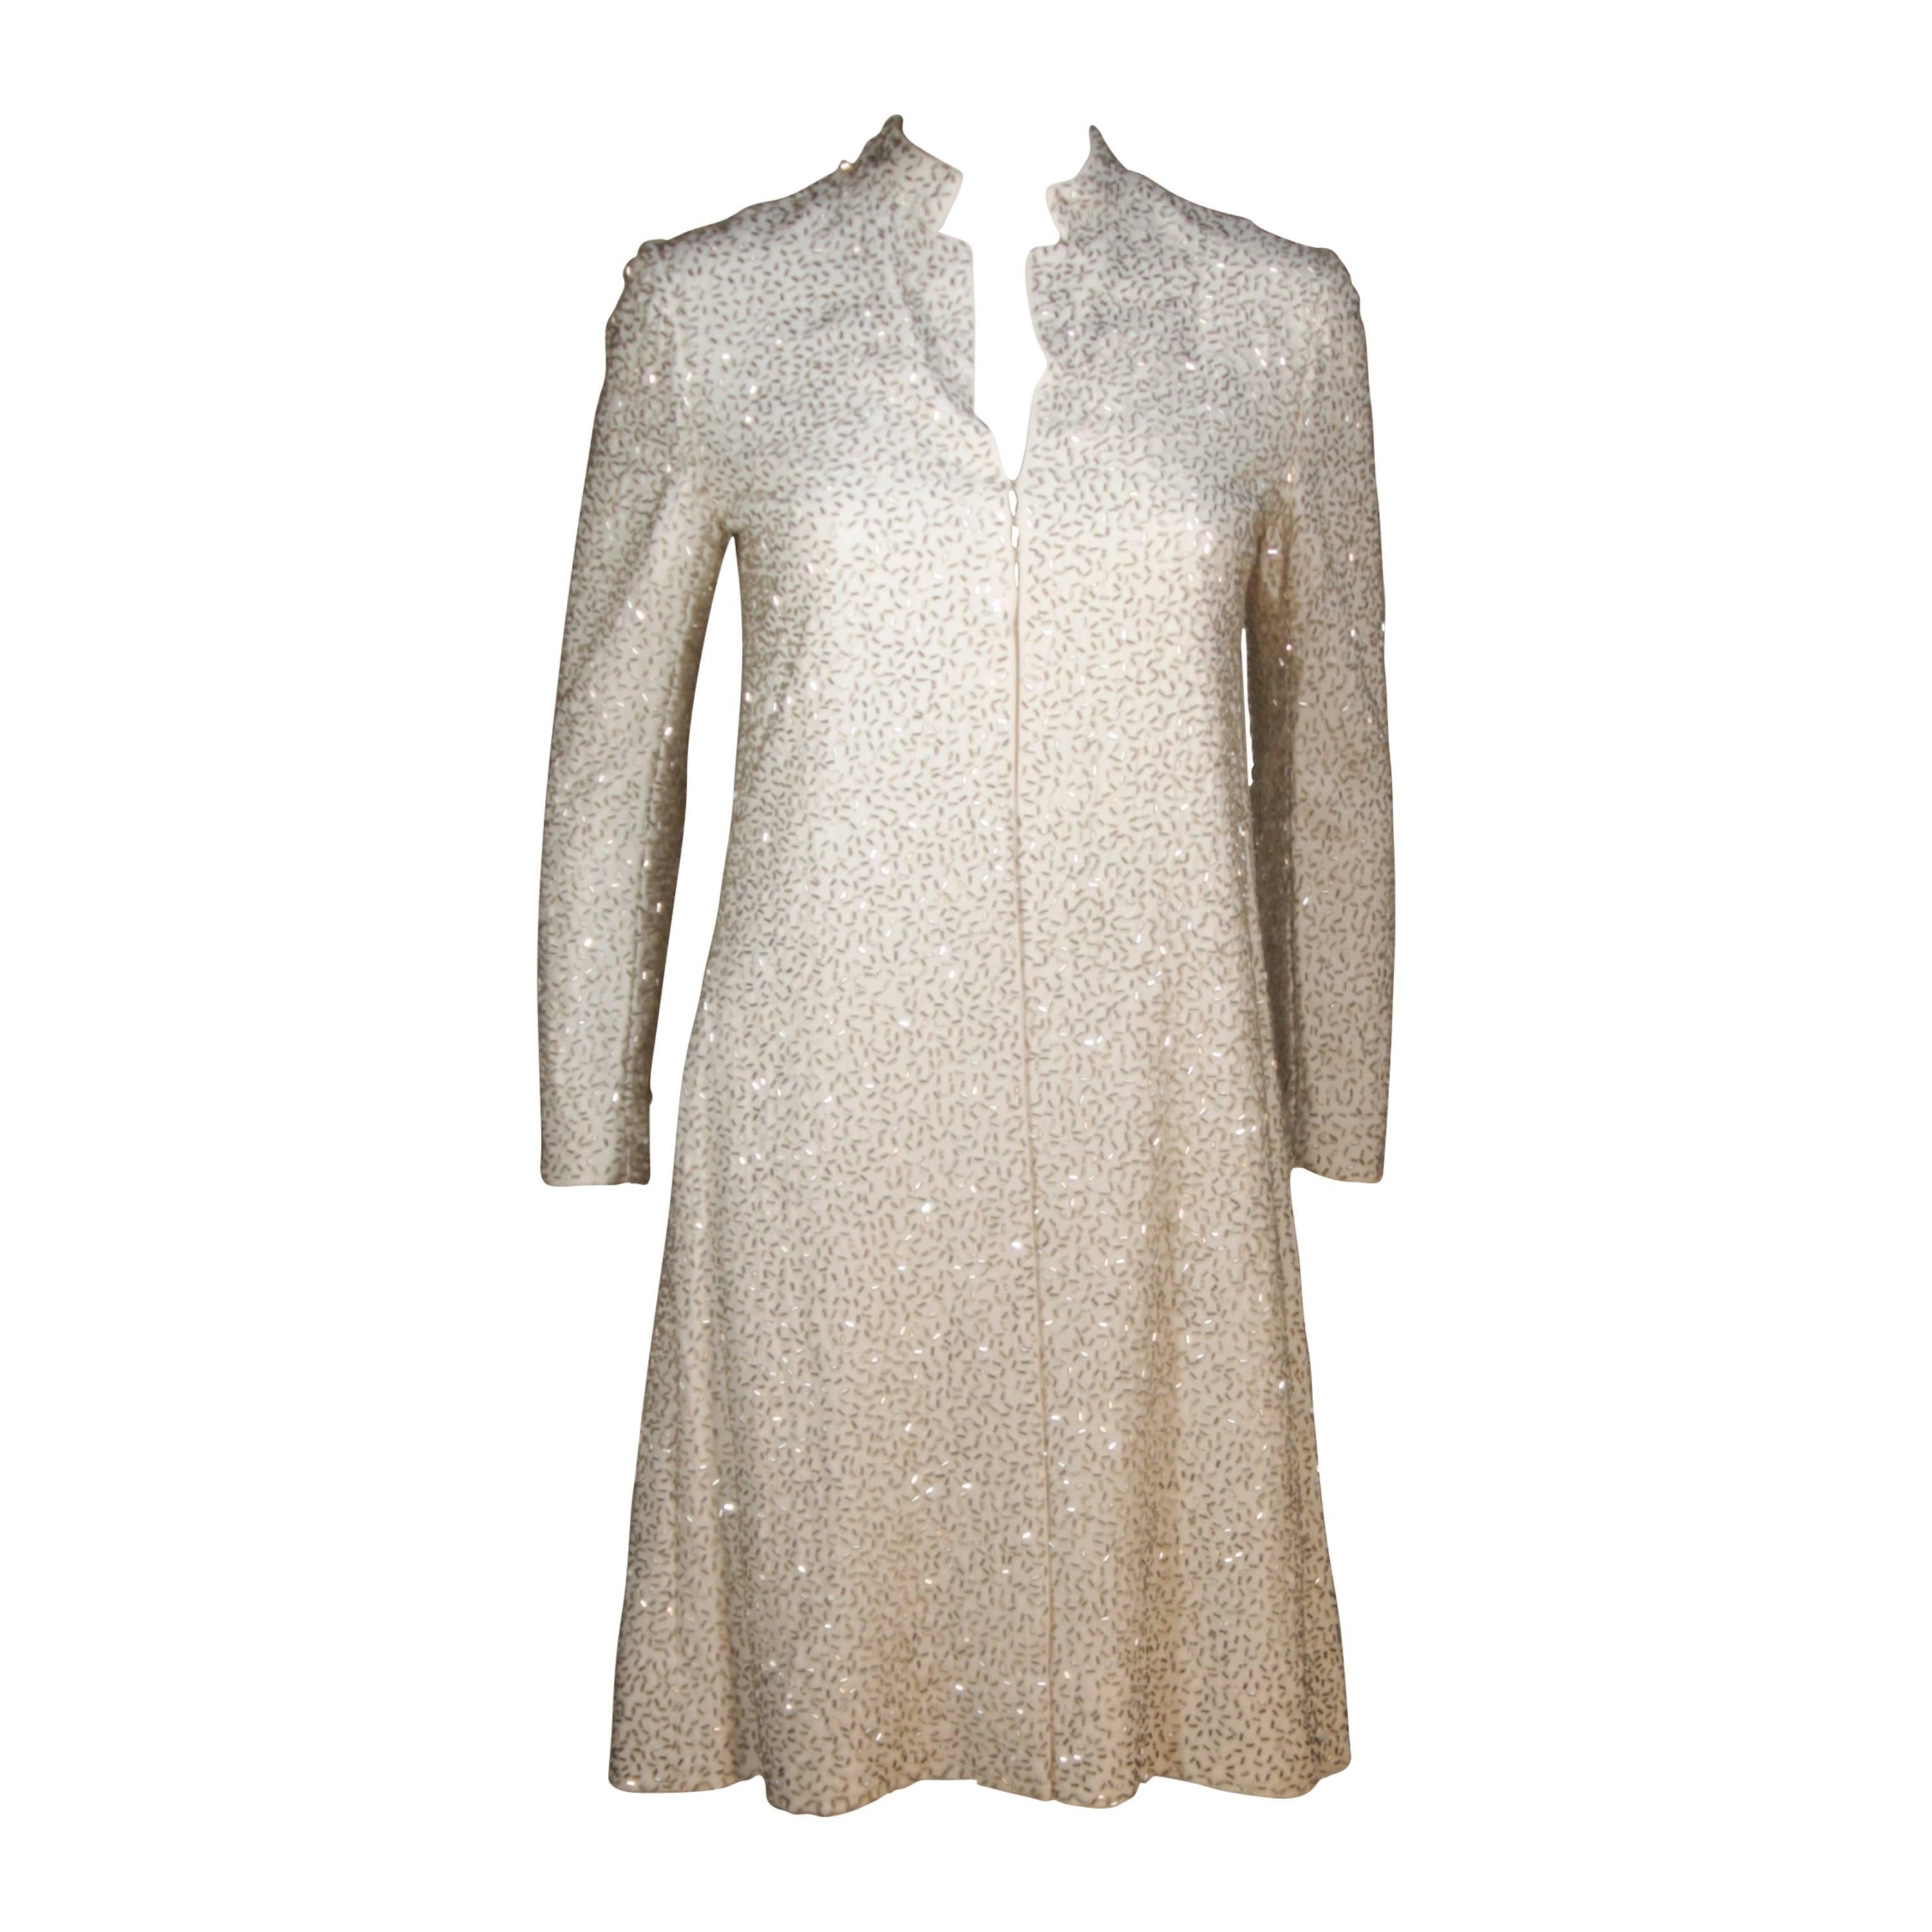 Vintage Off-White Silk Coat with Silver Beading Size 4-6